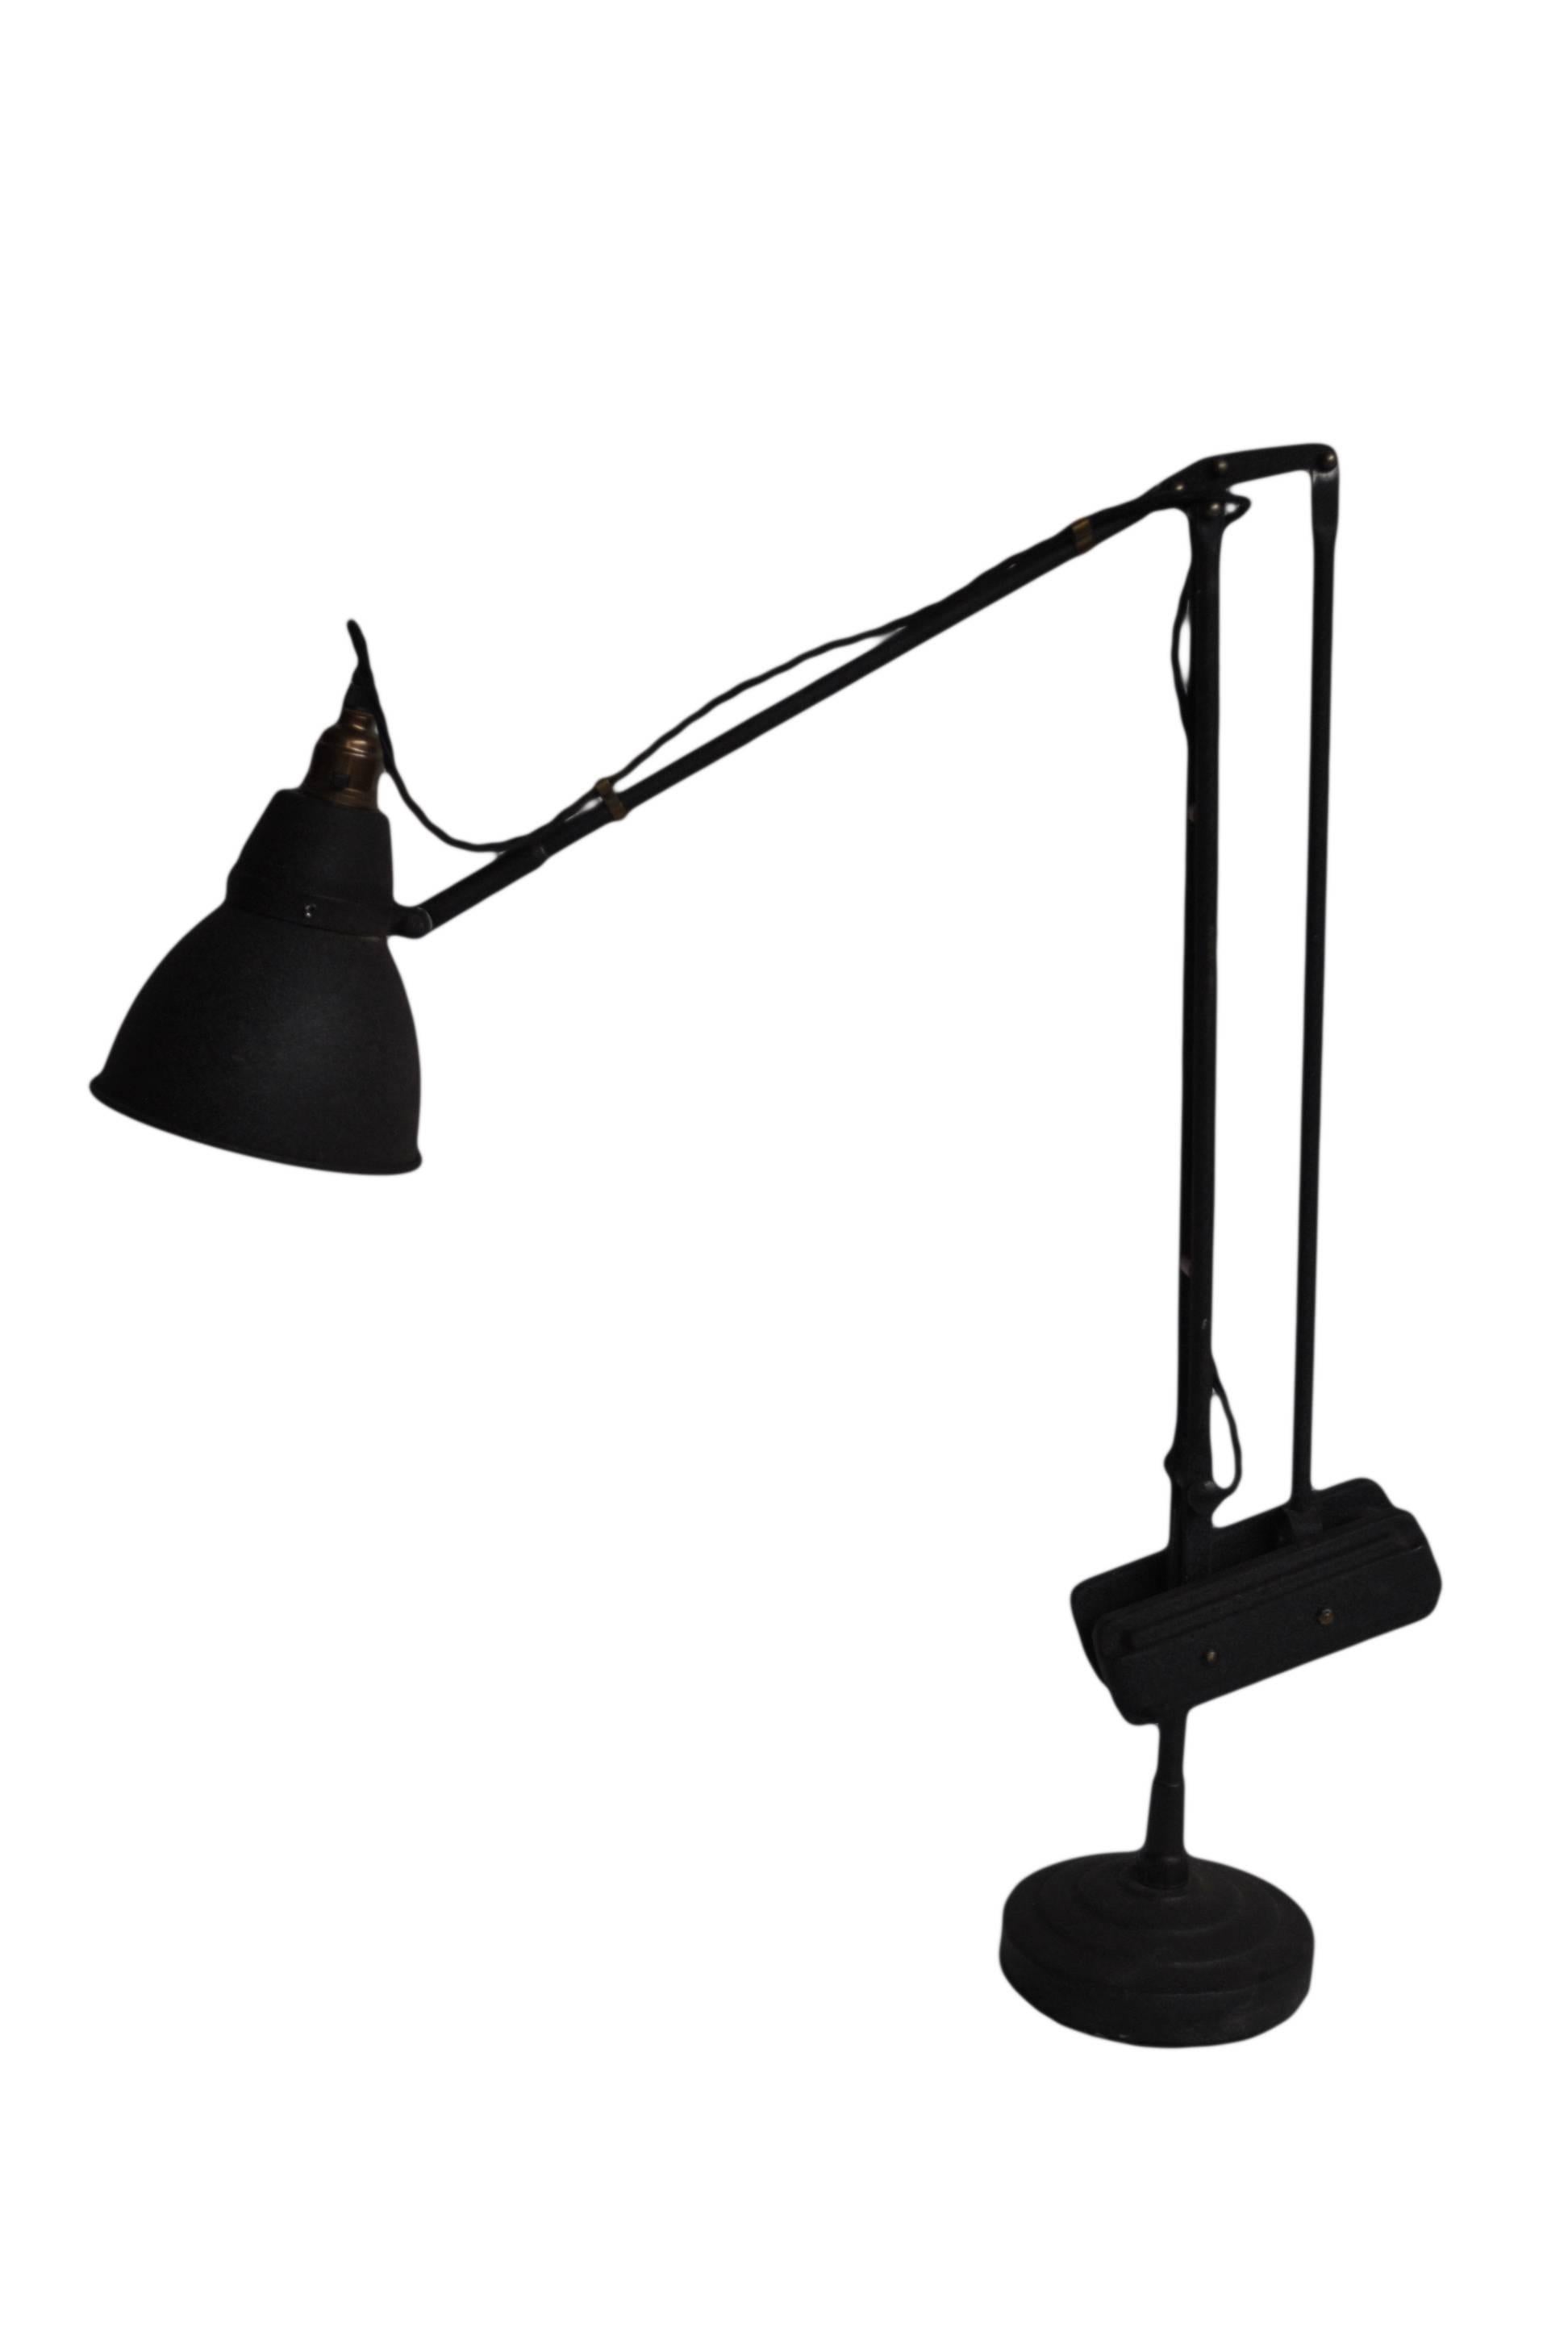 A highly unusual European counterbalance Anglepoise lamp. Produced early in the 20th century. Retaining its matte black original paintwork. Fully re-wired.
Moves and positions effortlessly.